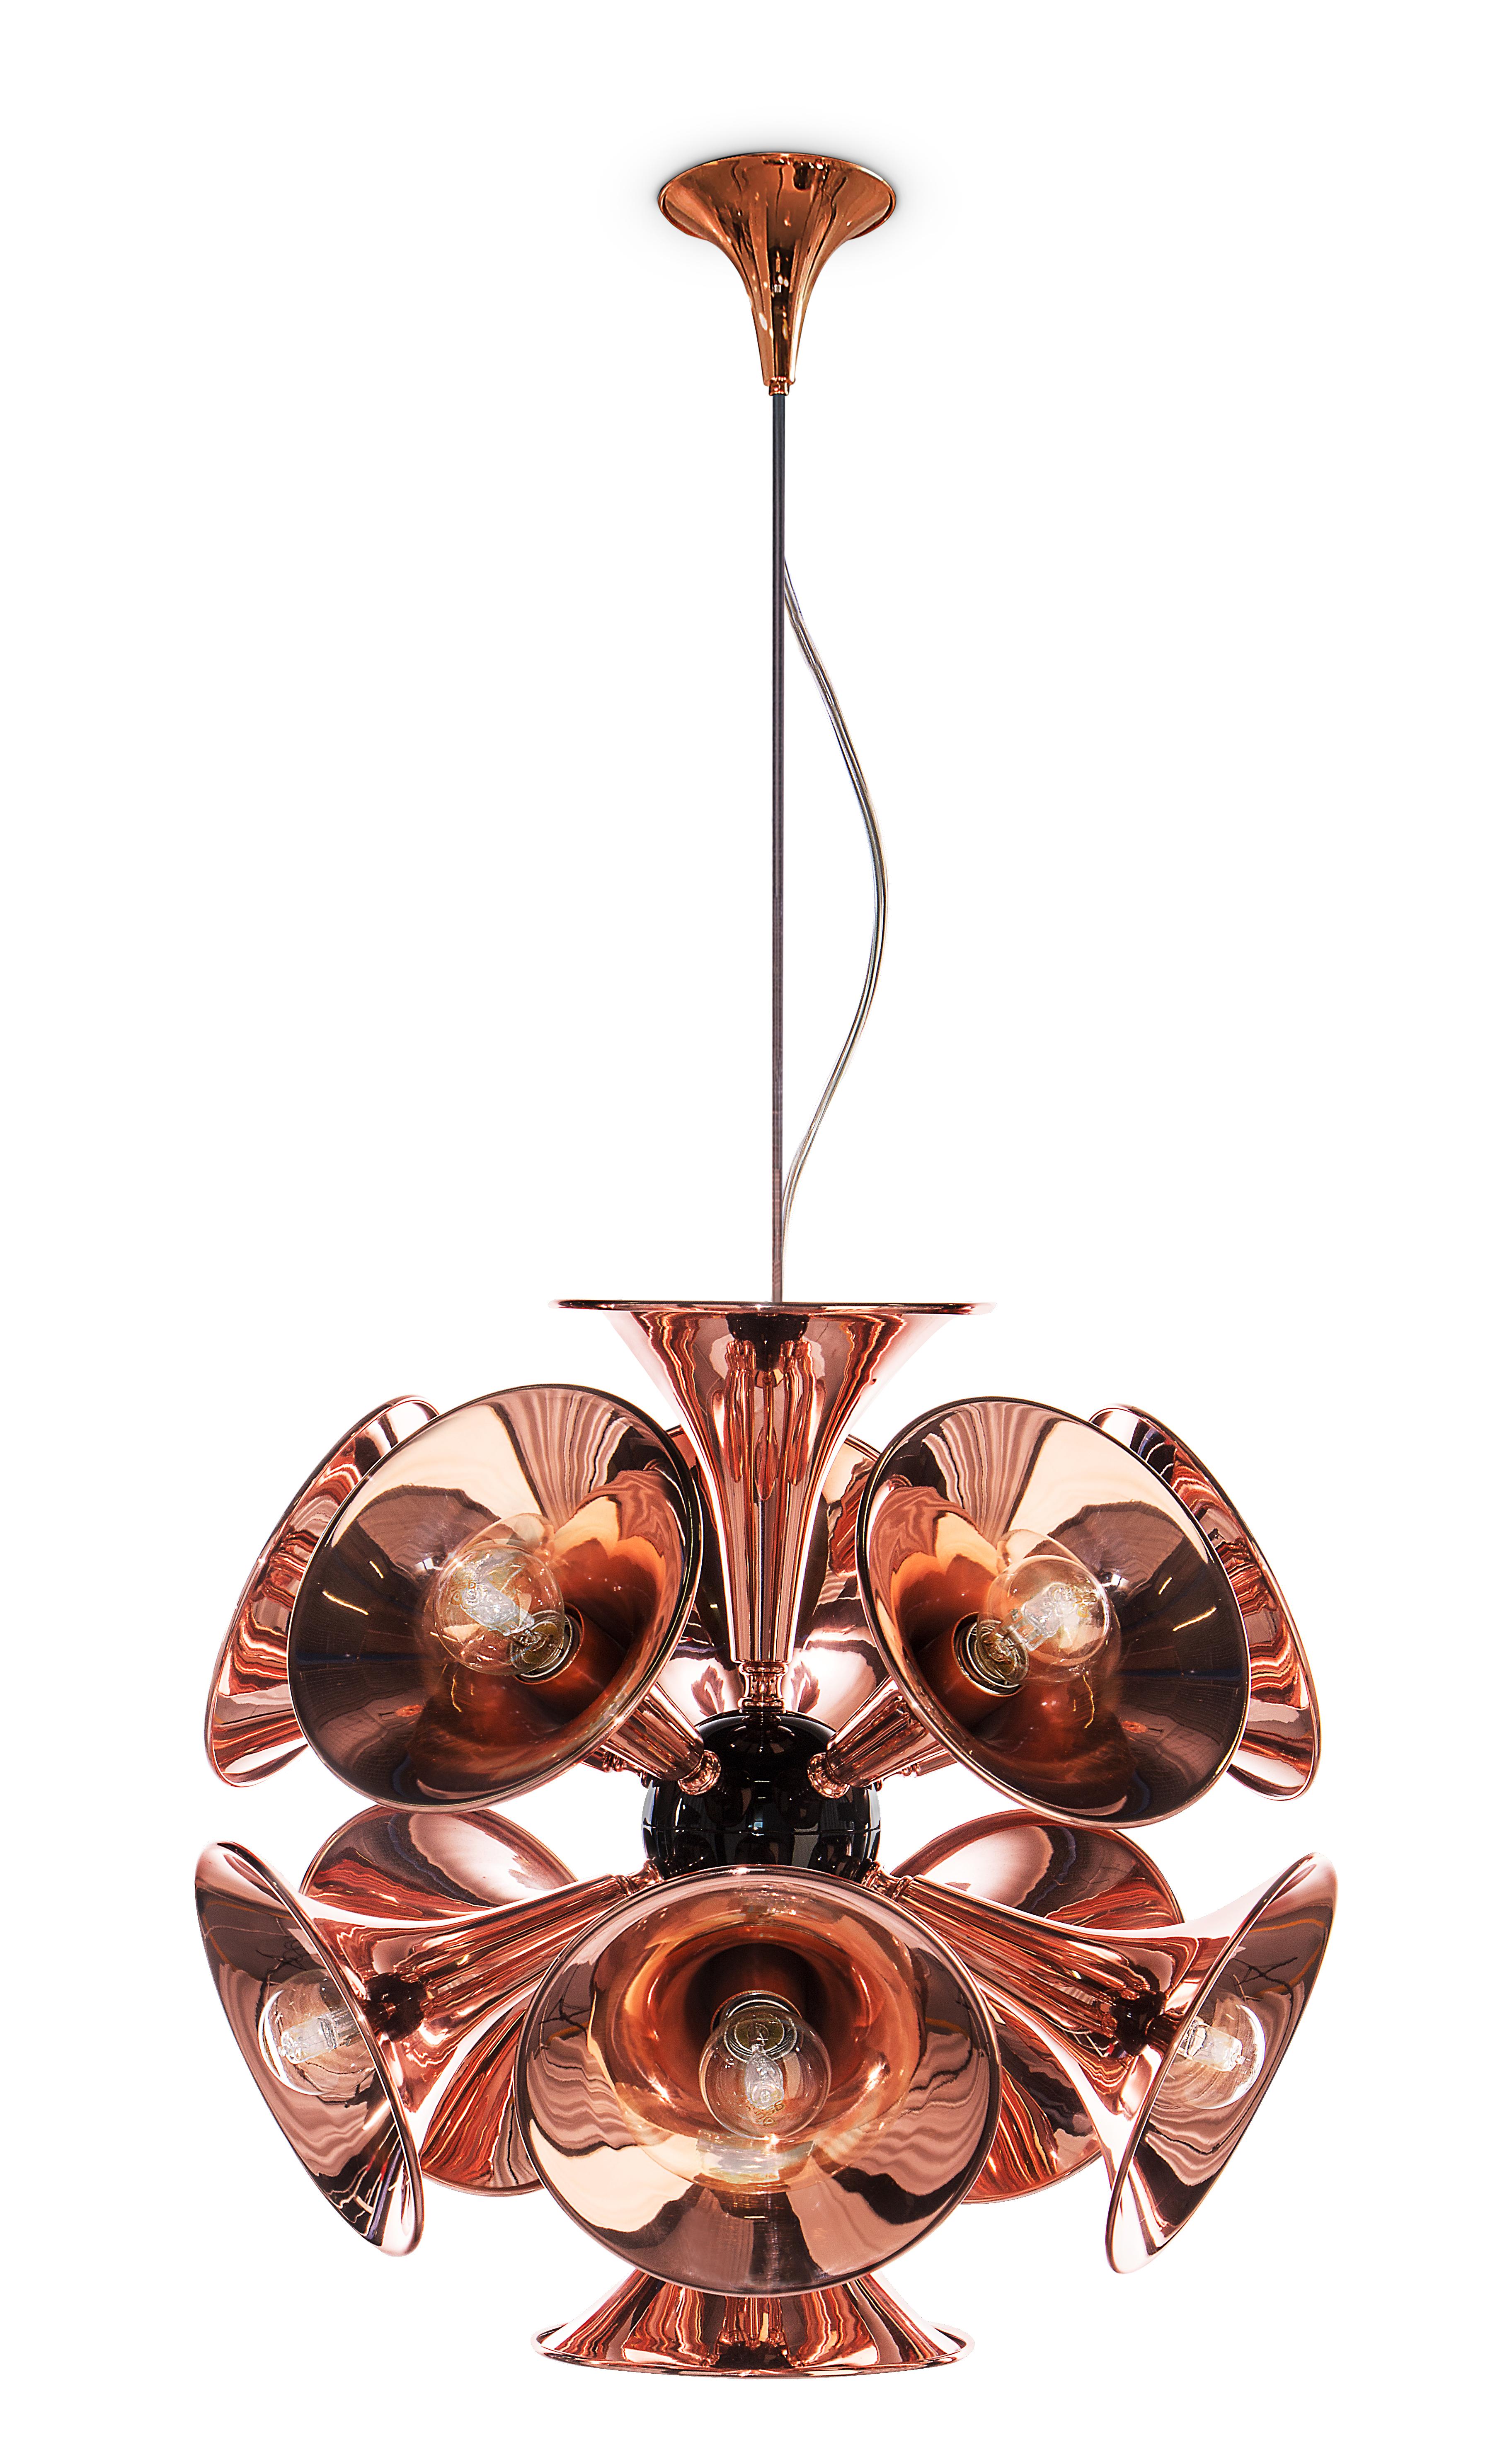 Inspired by the american trumpet player Chris Botti as a tribute to jazz music, Botti pendant lamp is a slightly smaller version of the modern chandelier with 15 trumpet-shaped shapes that stretch out from the center, creating a perfect sphere. It